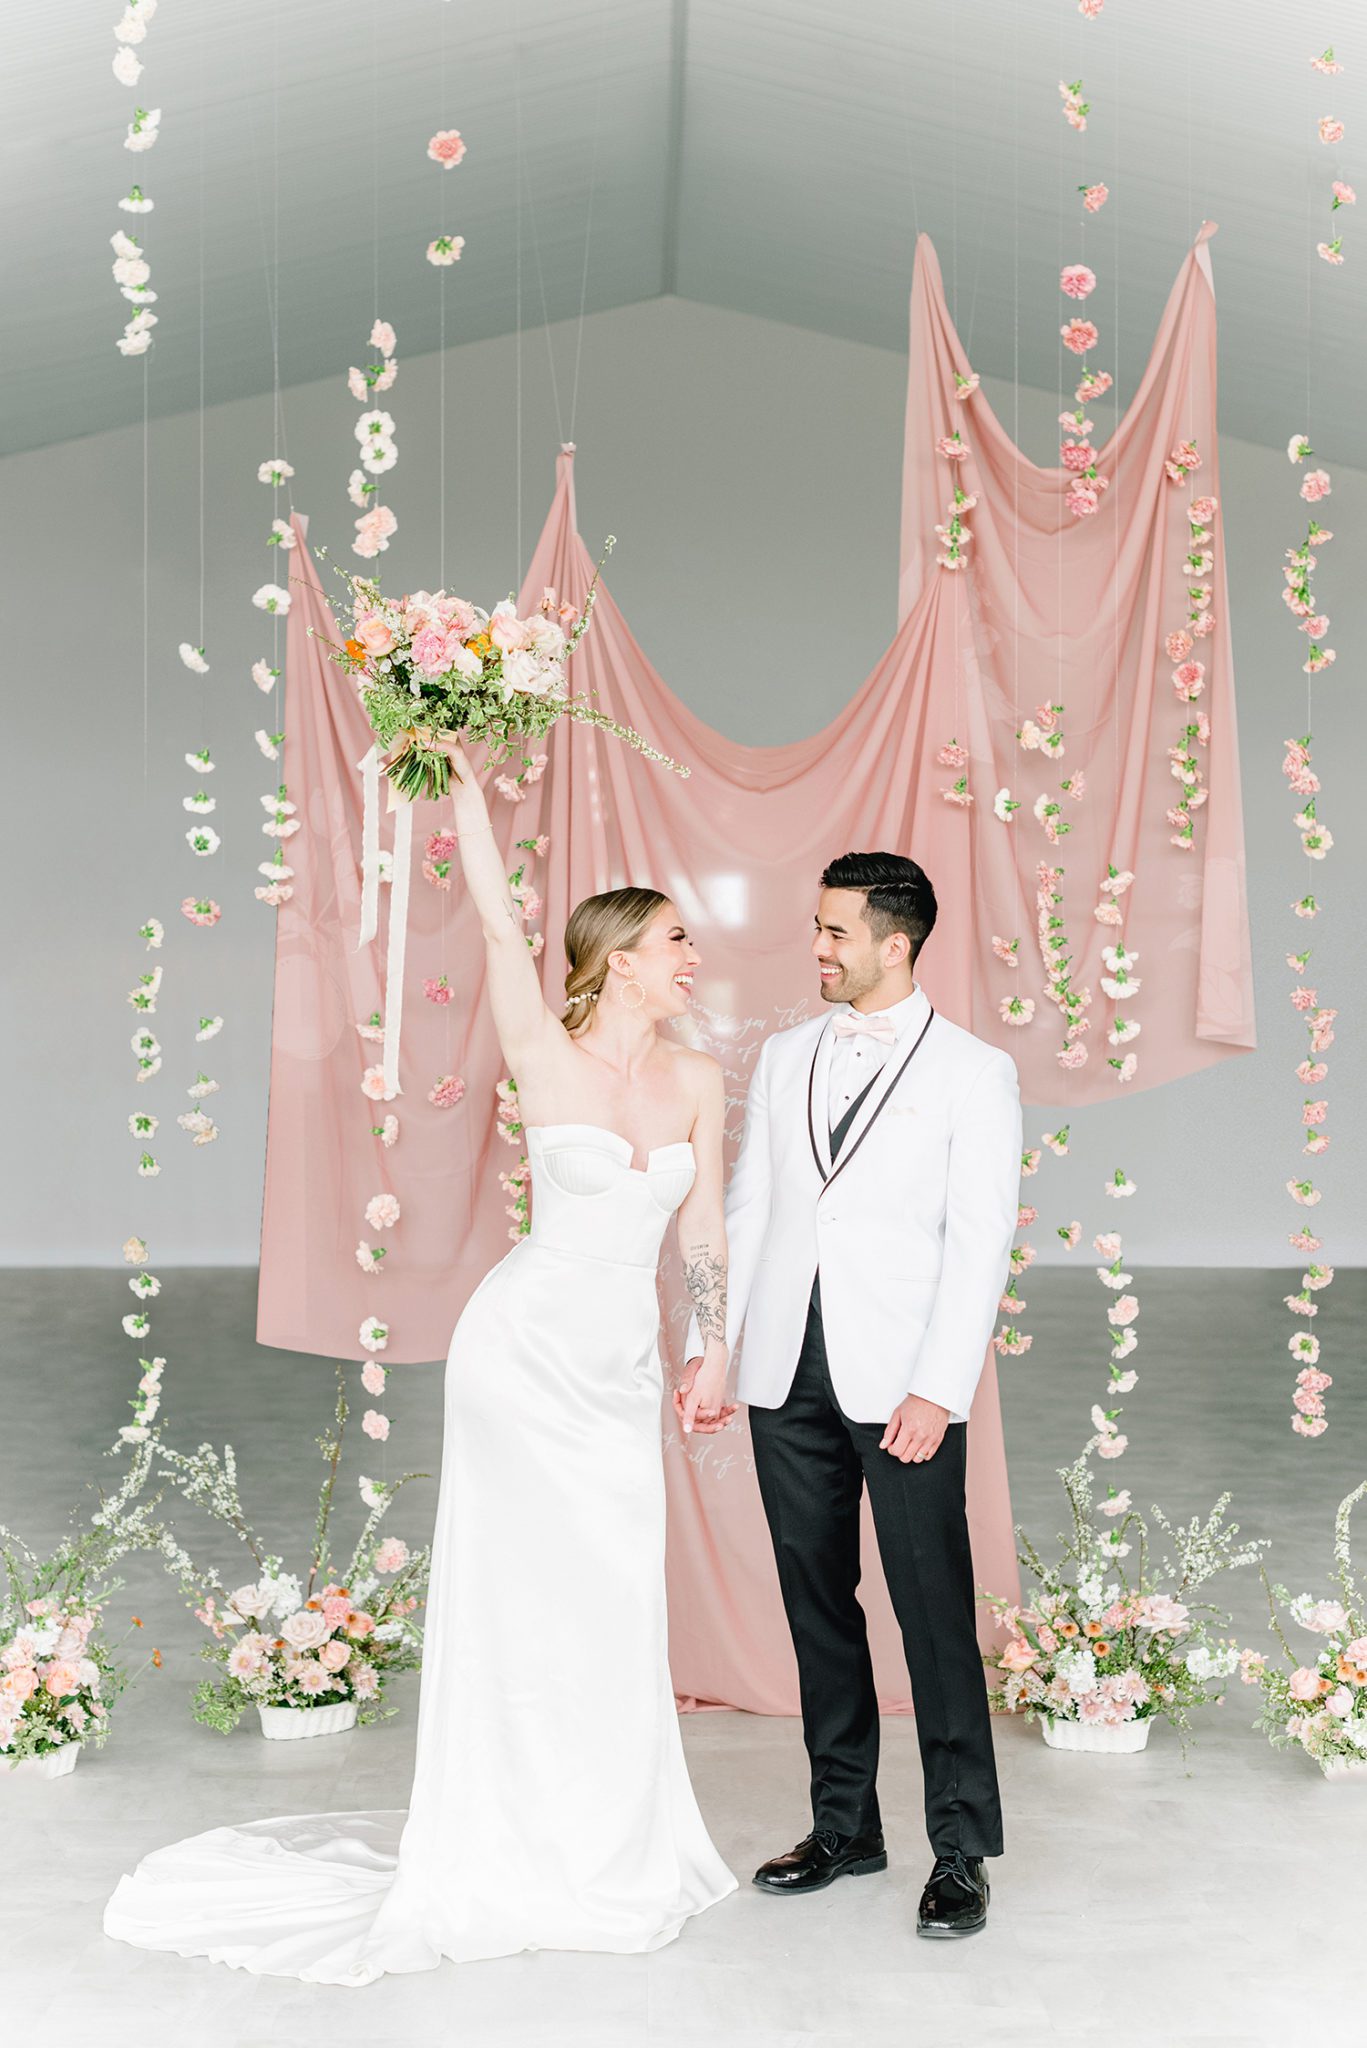 Hanging linens and floating florals for spring wedding, wedding portraits, blush and tangerine wedding bouquet, alternative ceremony space